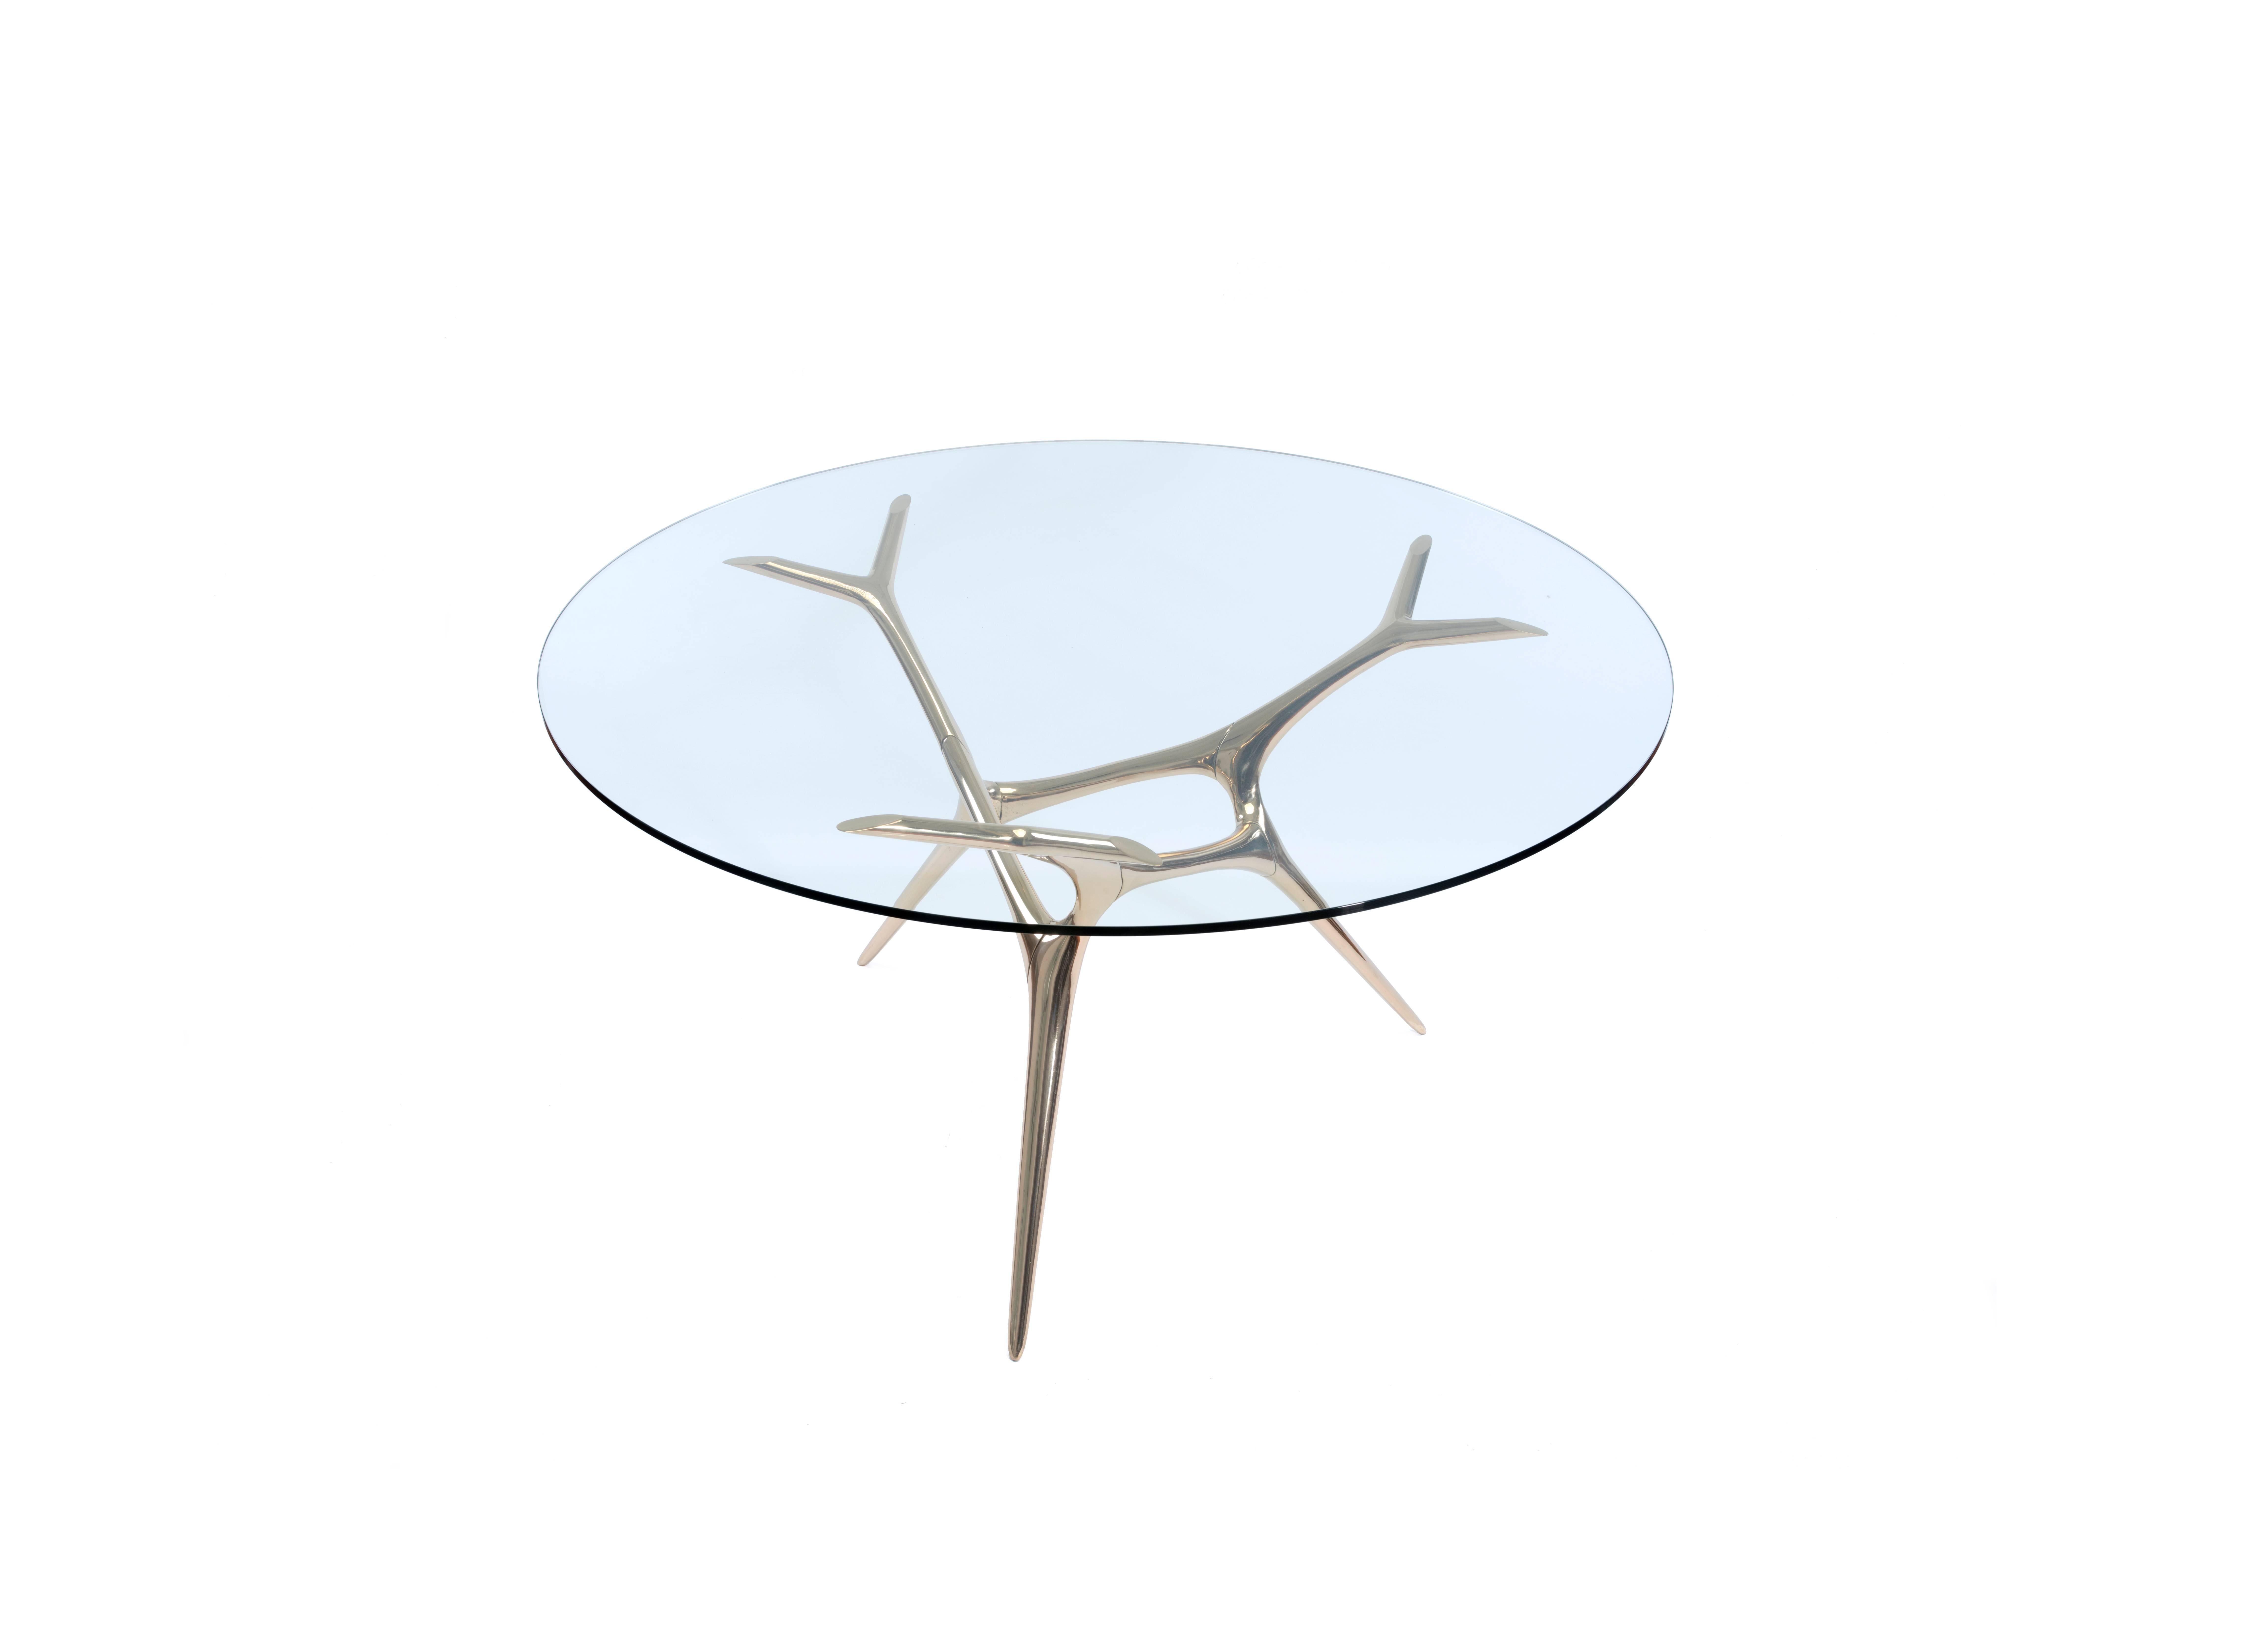 E-Volved Table was fabricated out of cast and polished bronze and glass by designer Timothy Schreiber.

Also available in polished stainless steel.

Timothy Schreiber initially trained in cabinet making in Germany before studying architecture and